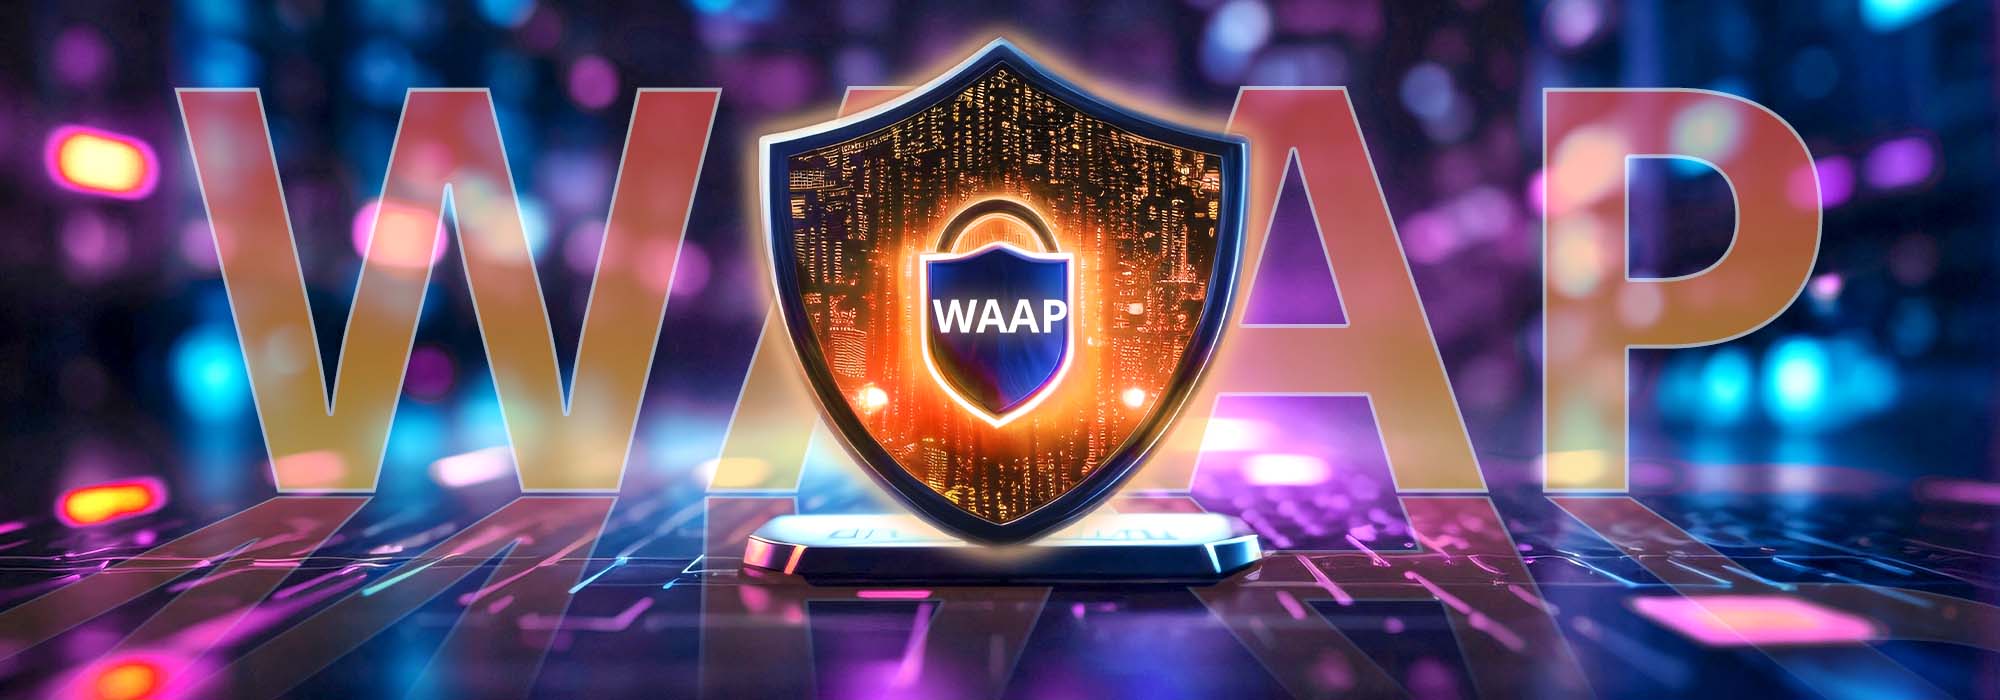 CDNetworks Upgrades WAAP Solution with Its Latest AI-Powered Cloud Security 2.0 Platform and Enhanced Adaptive Protection Capabilities